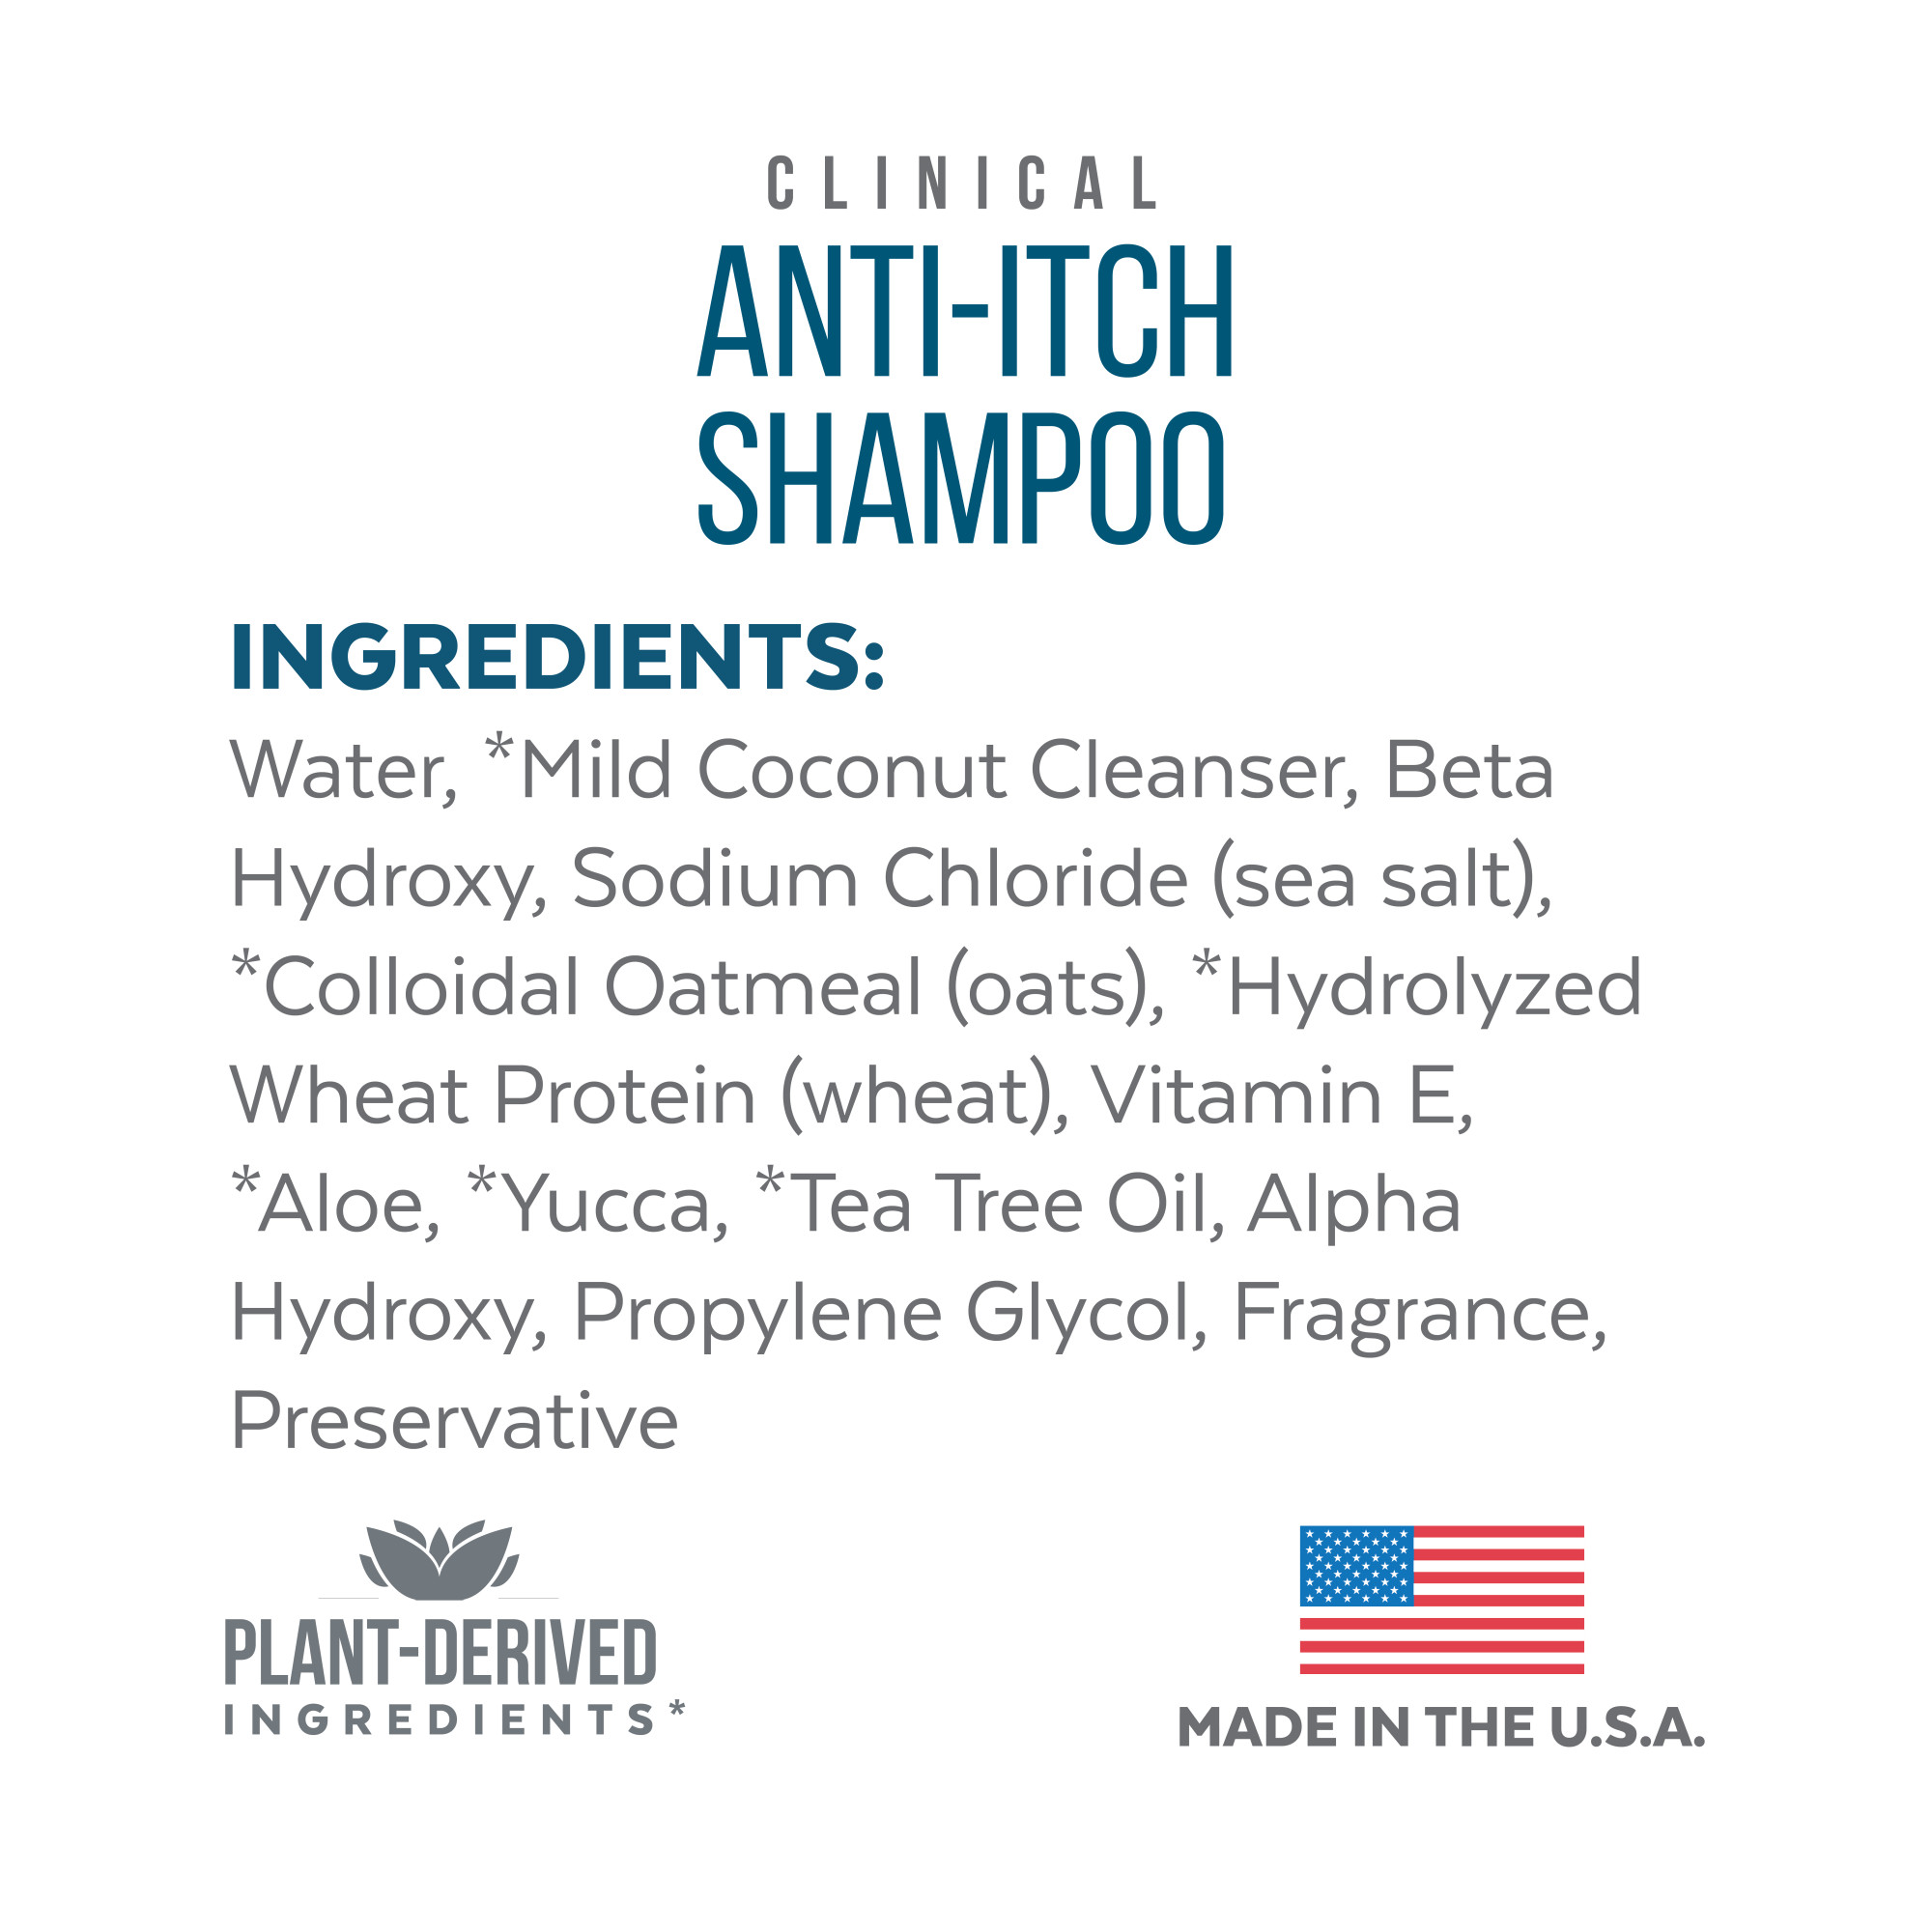 Clinical Anti-Itch Shampoo for Pets